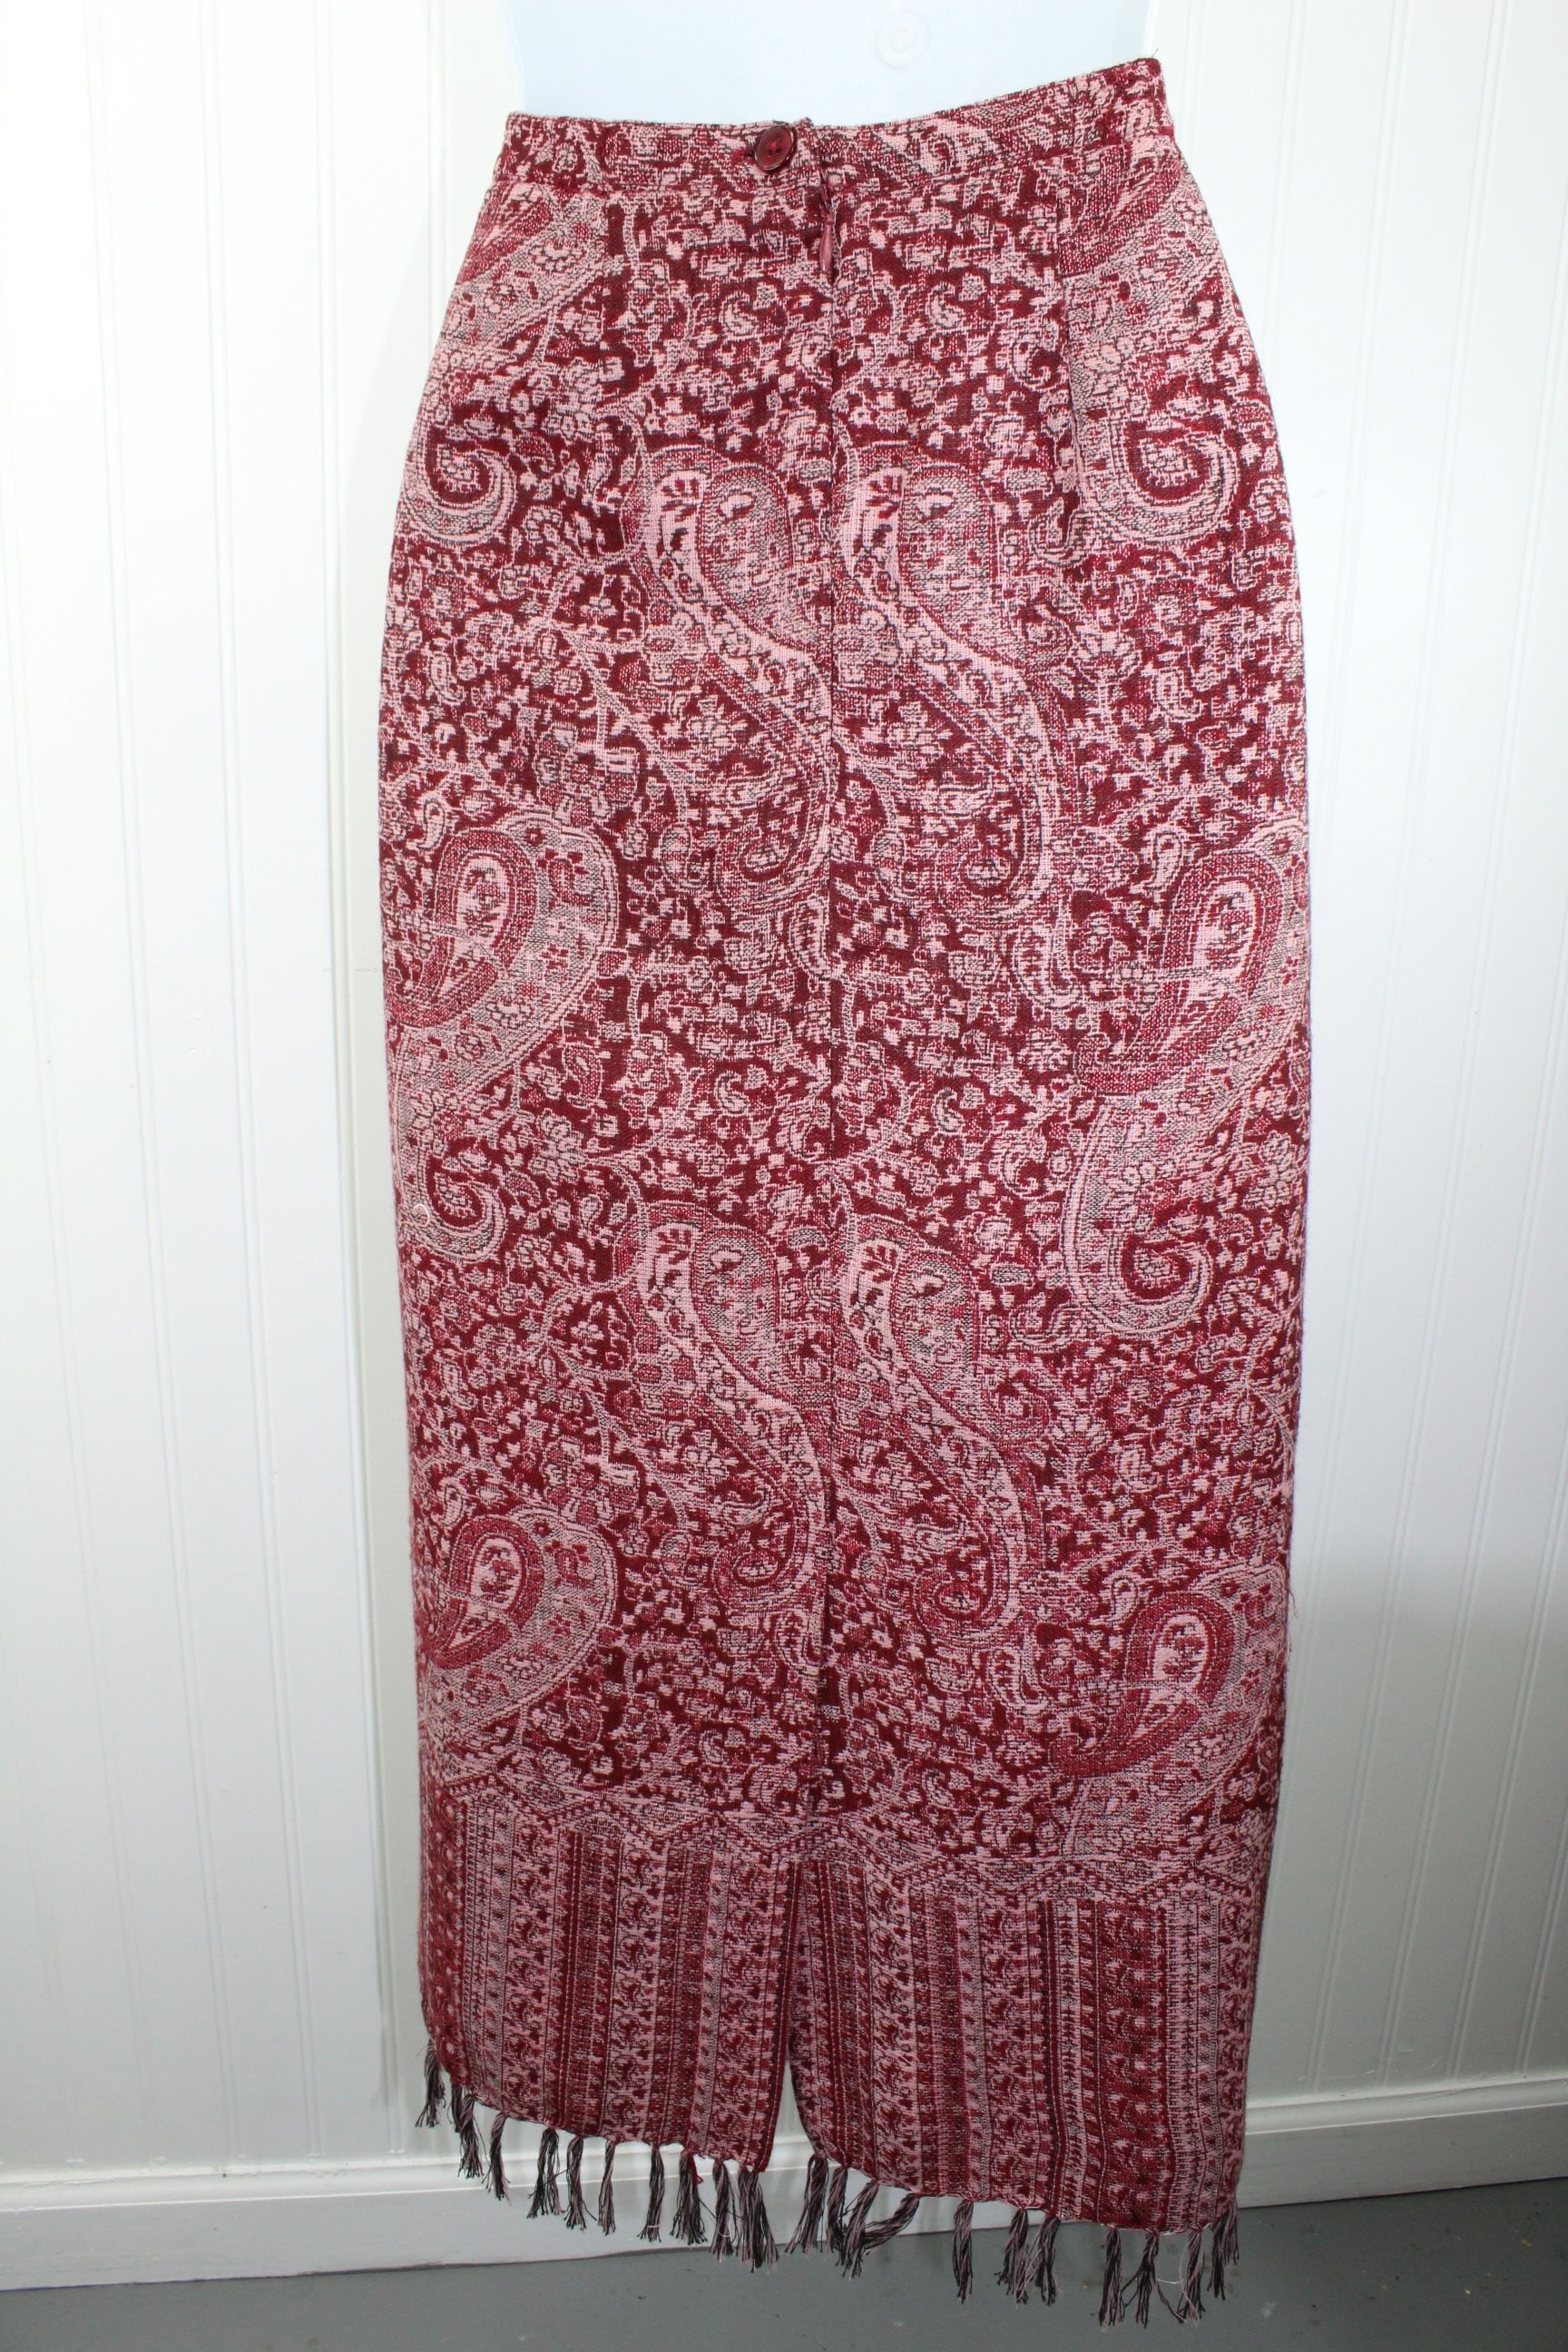 Nouveaux Petite Skirt Paisley Shades of Wine With Tiny Sparkles Fringe nice fit cut well